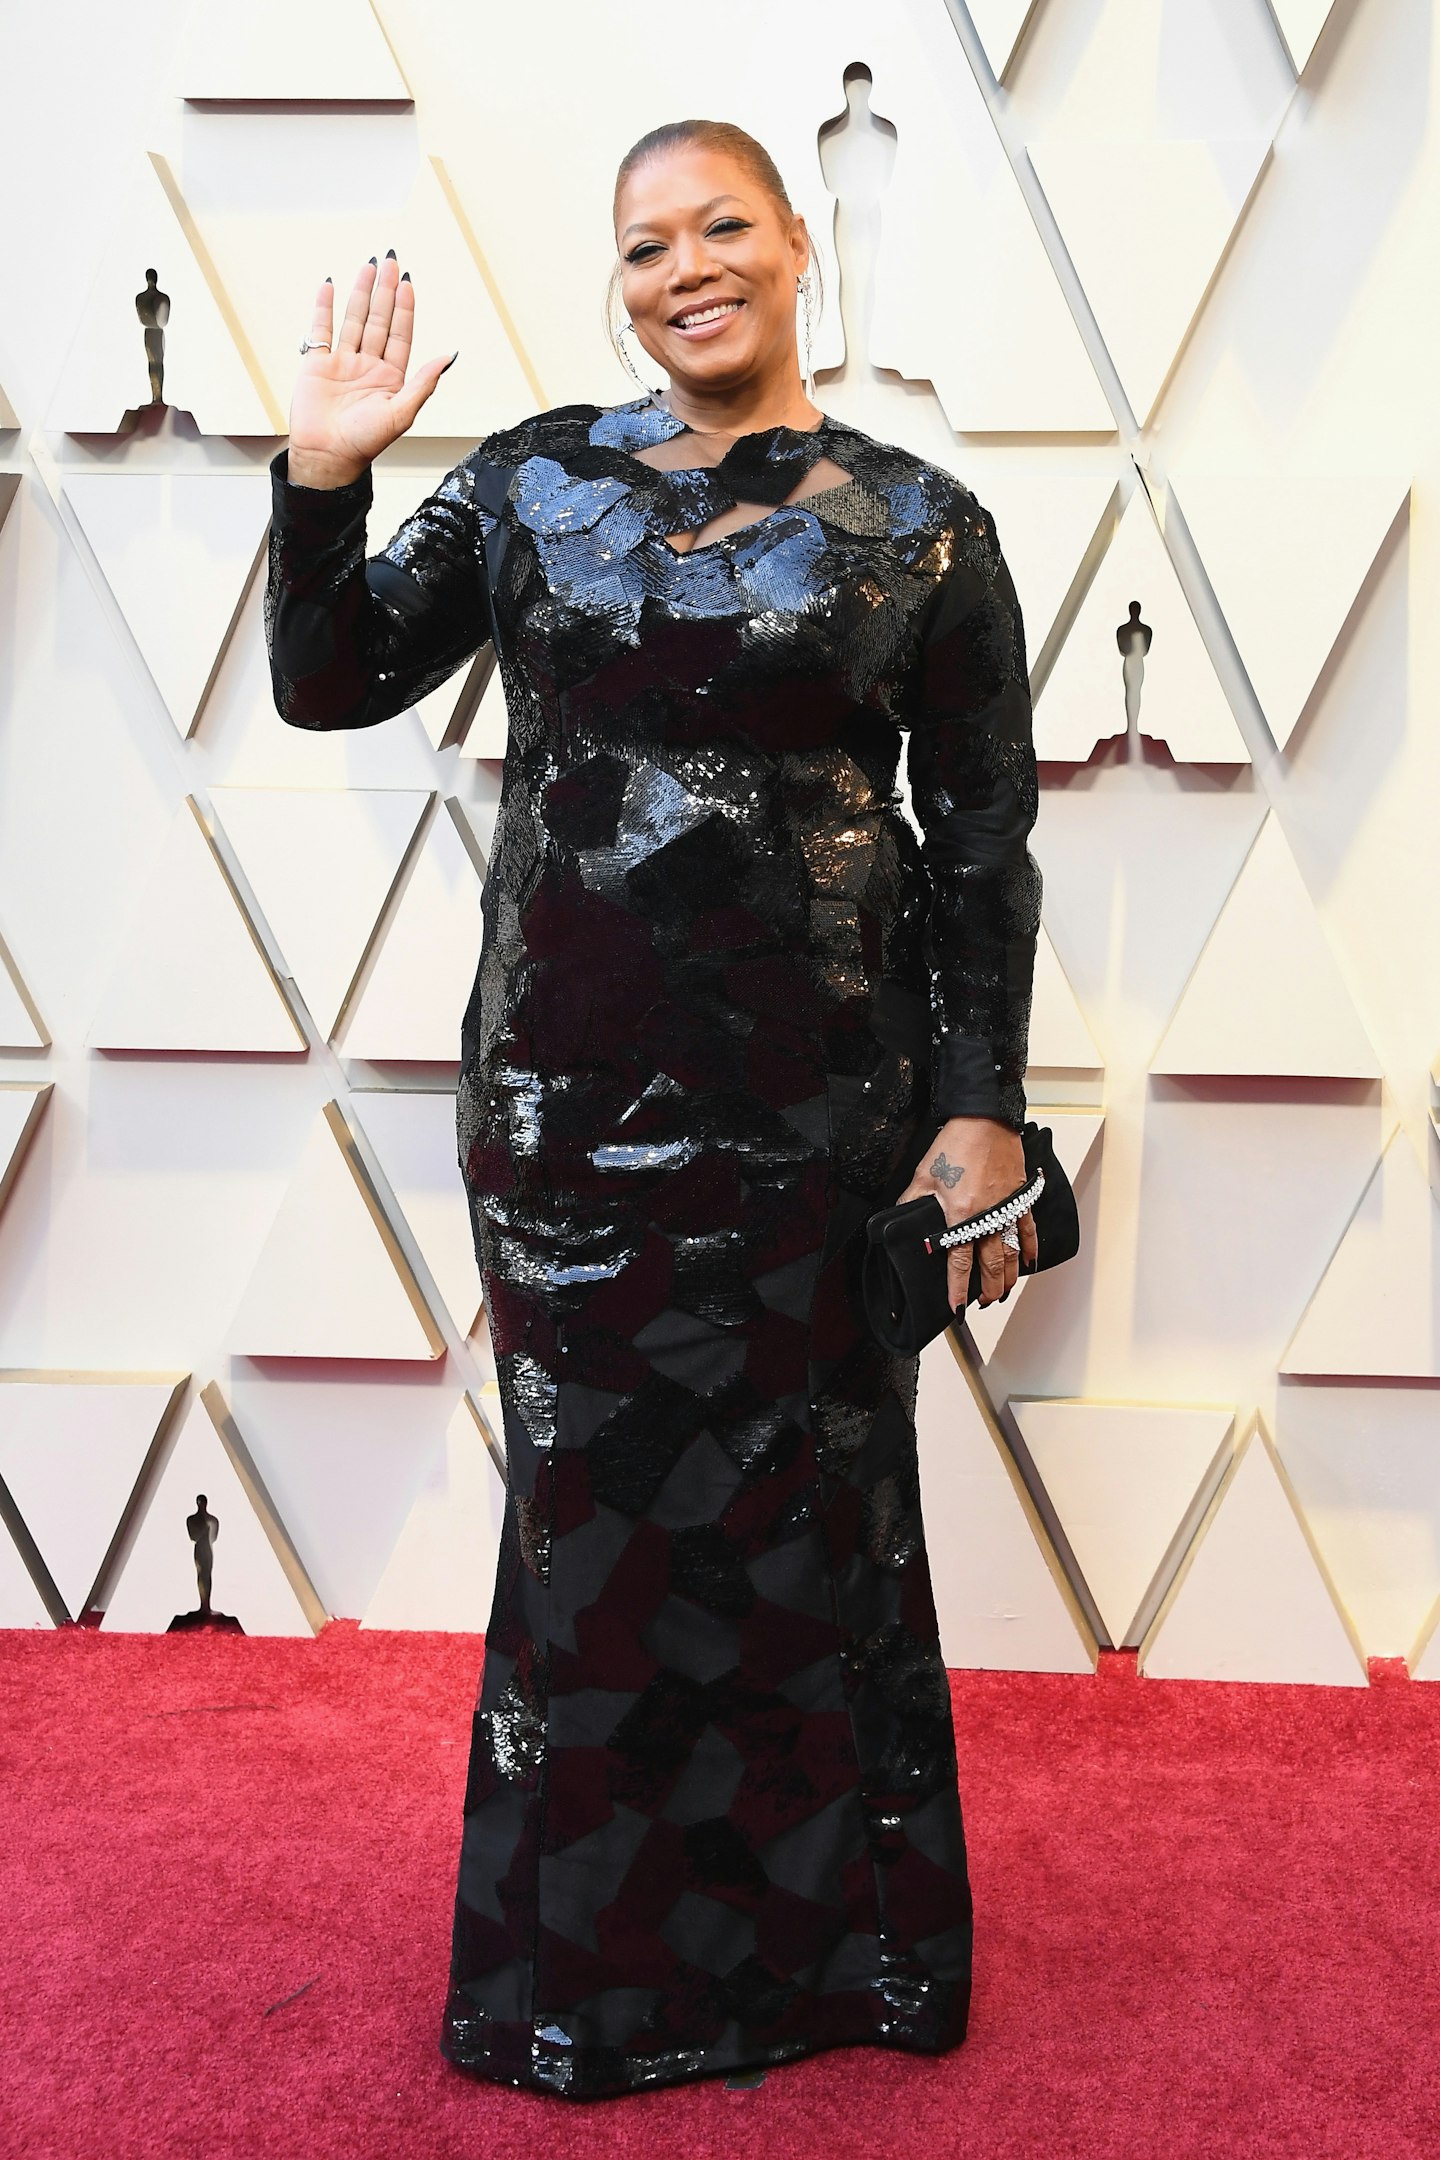 Queen Latifah at the 2019 Oscars